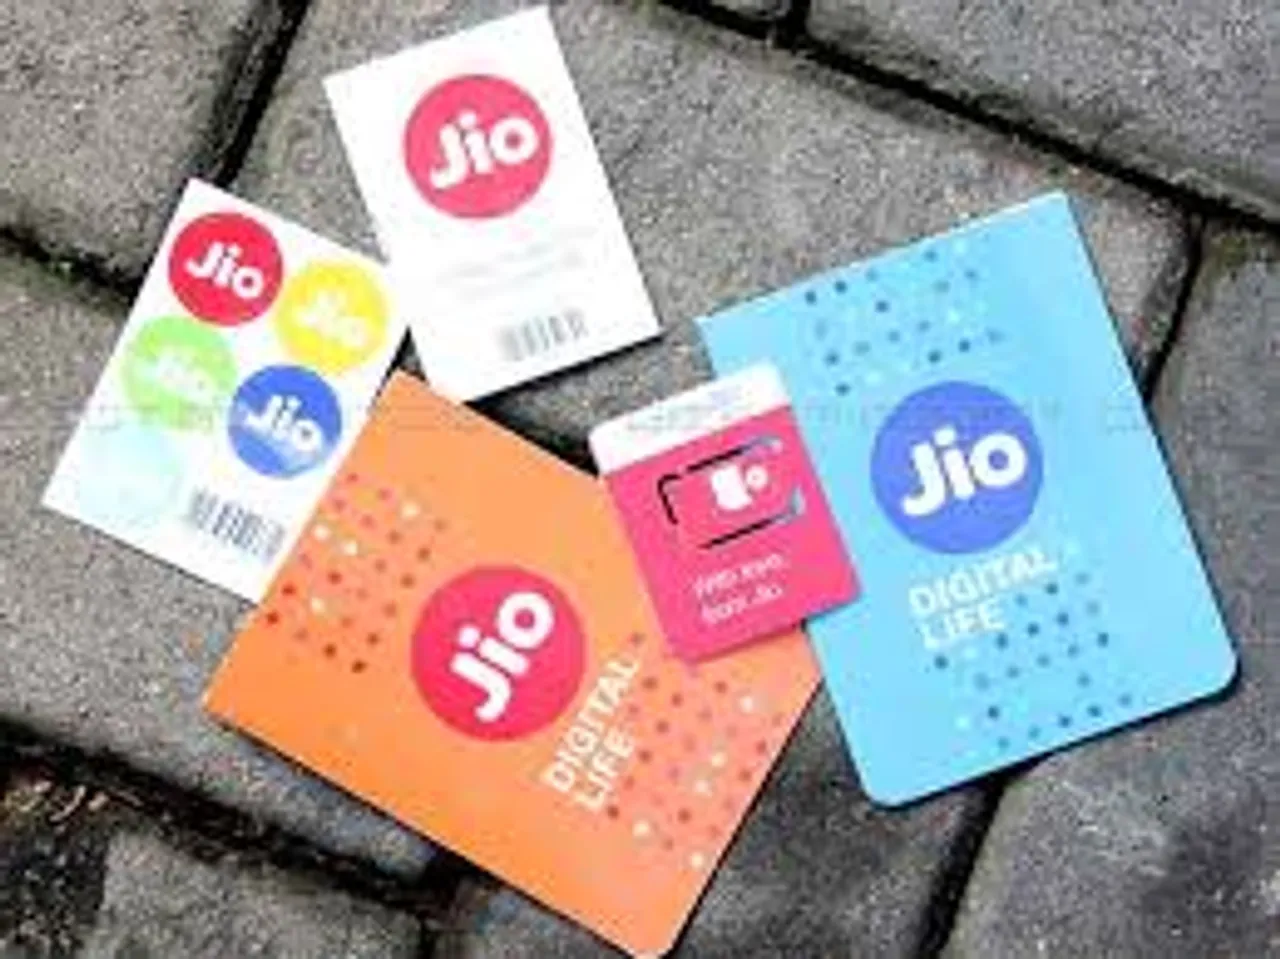 Only 1 week left to be a Jio Prime member